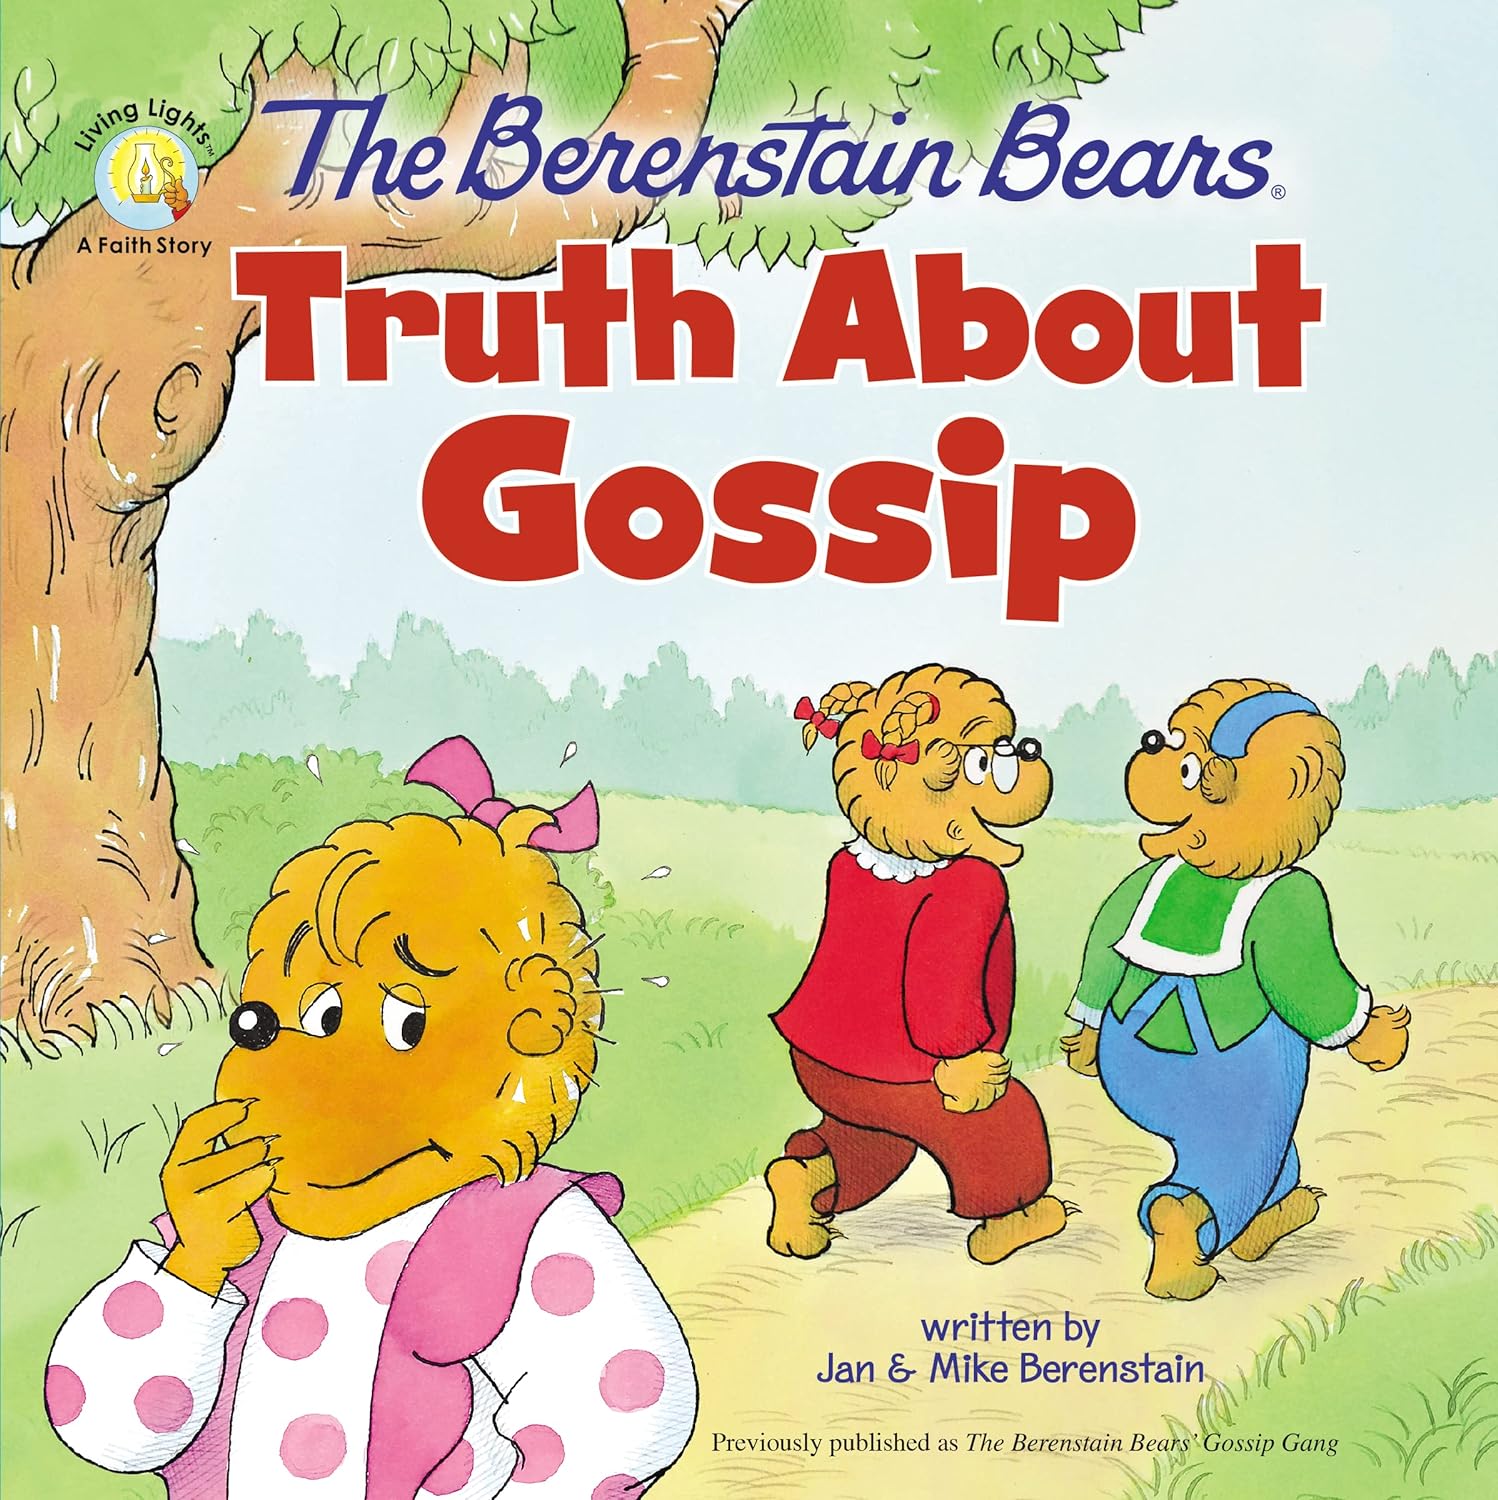 Berenstain Bears Truth About Gossip